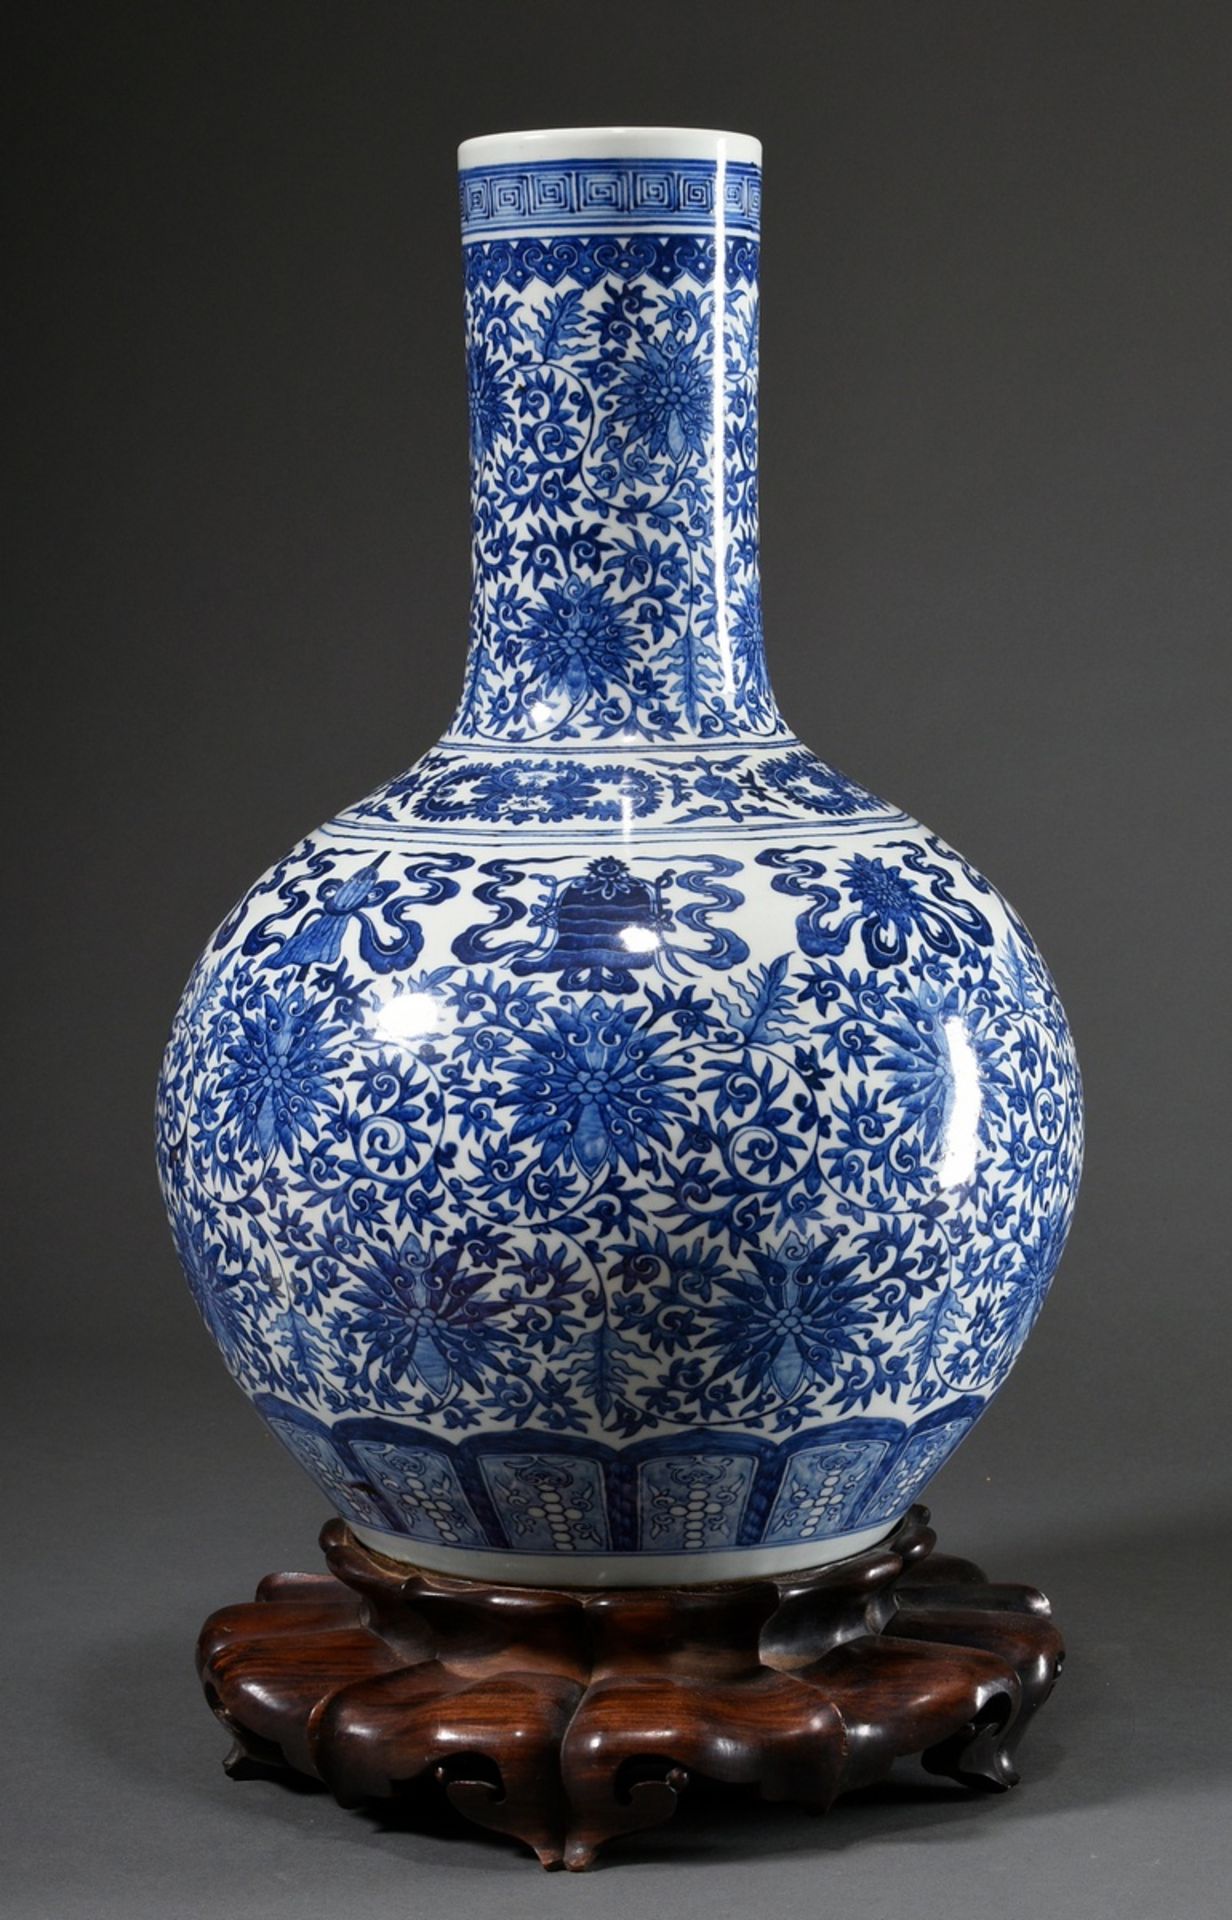 Very large Tianqiuping vase with tubular neck over spherical body and blue-and-white painting "lotu